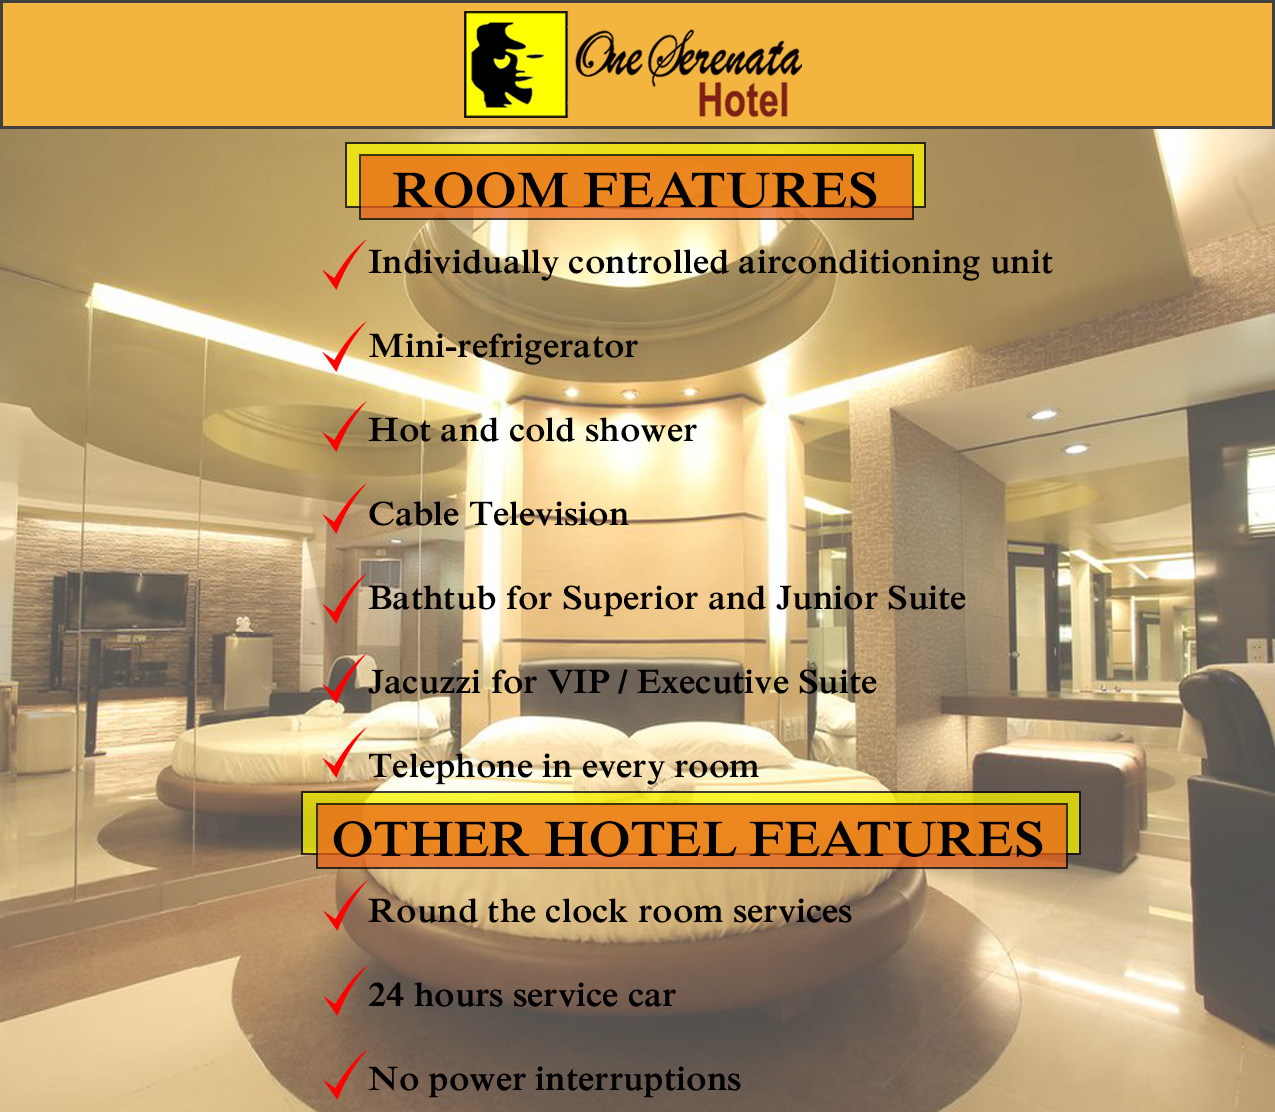 ROOM FEATURES 2